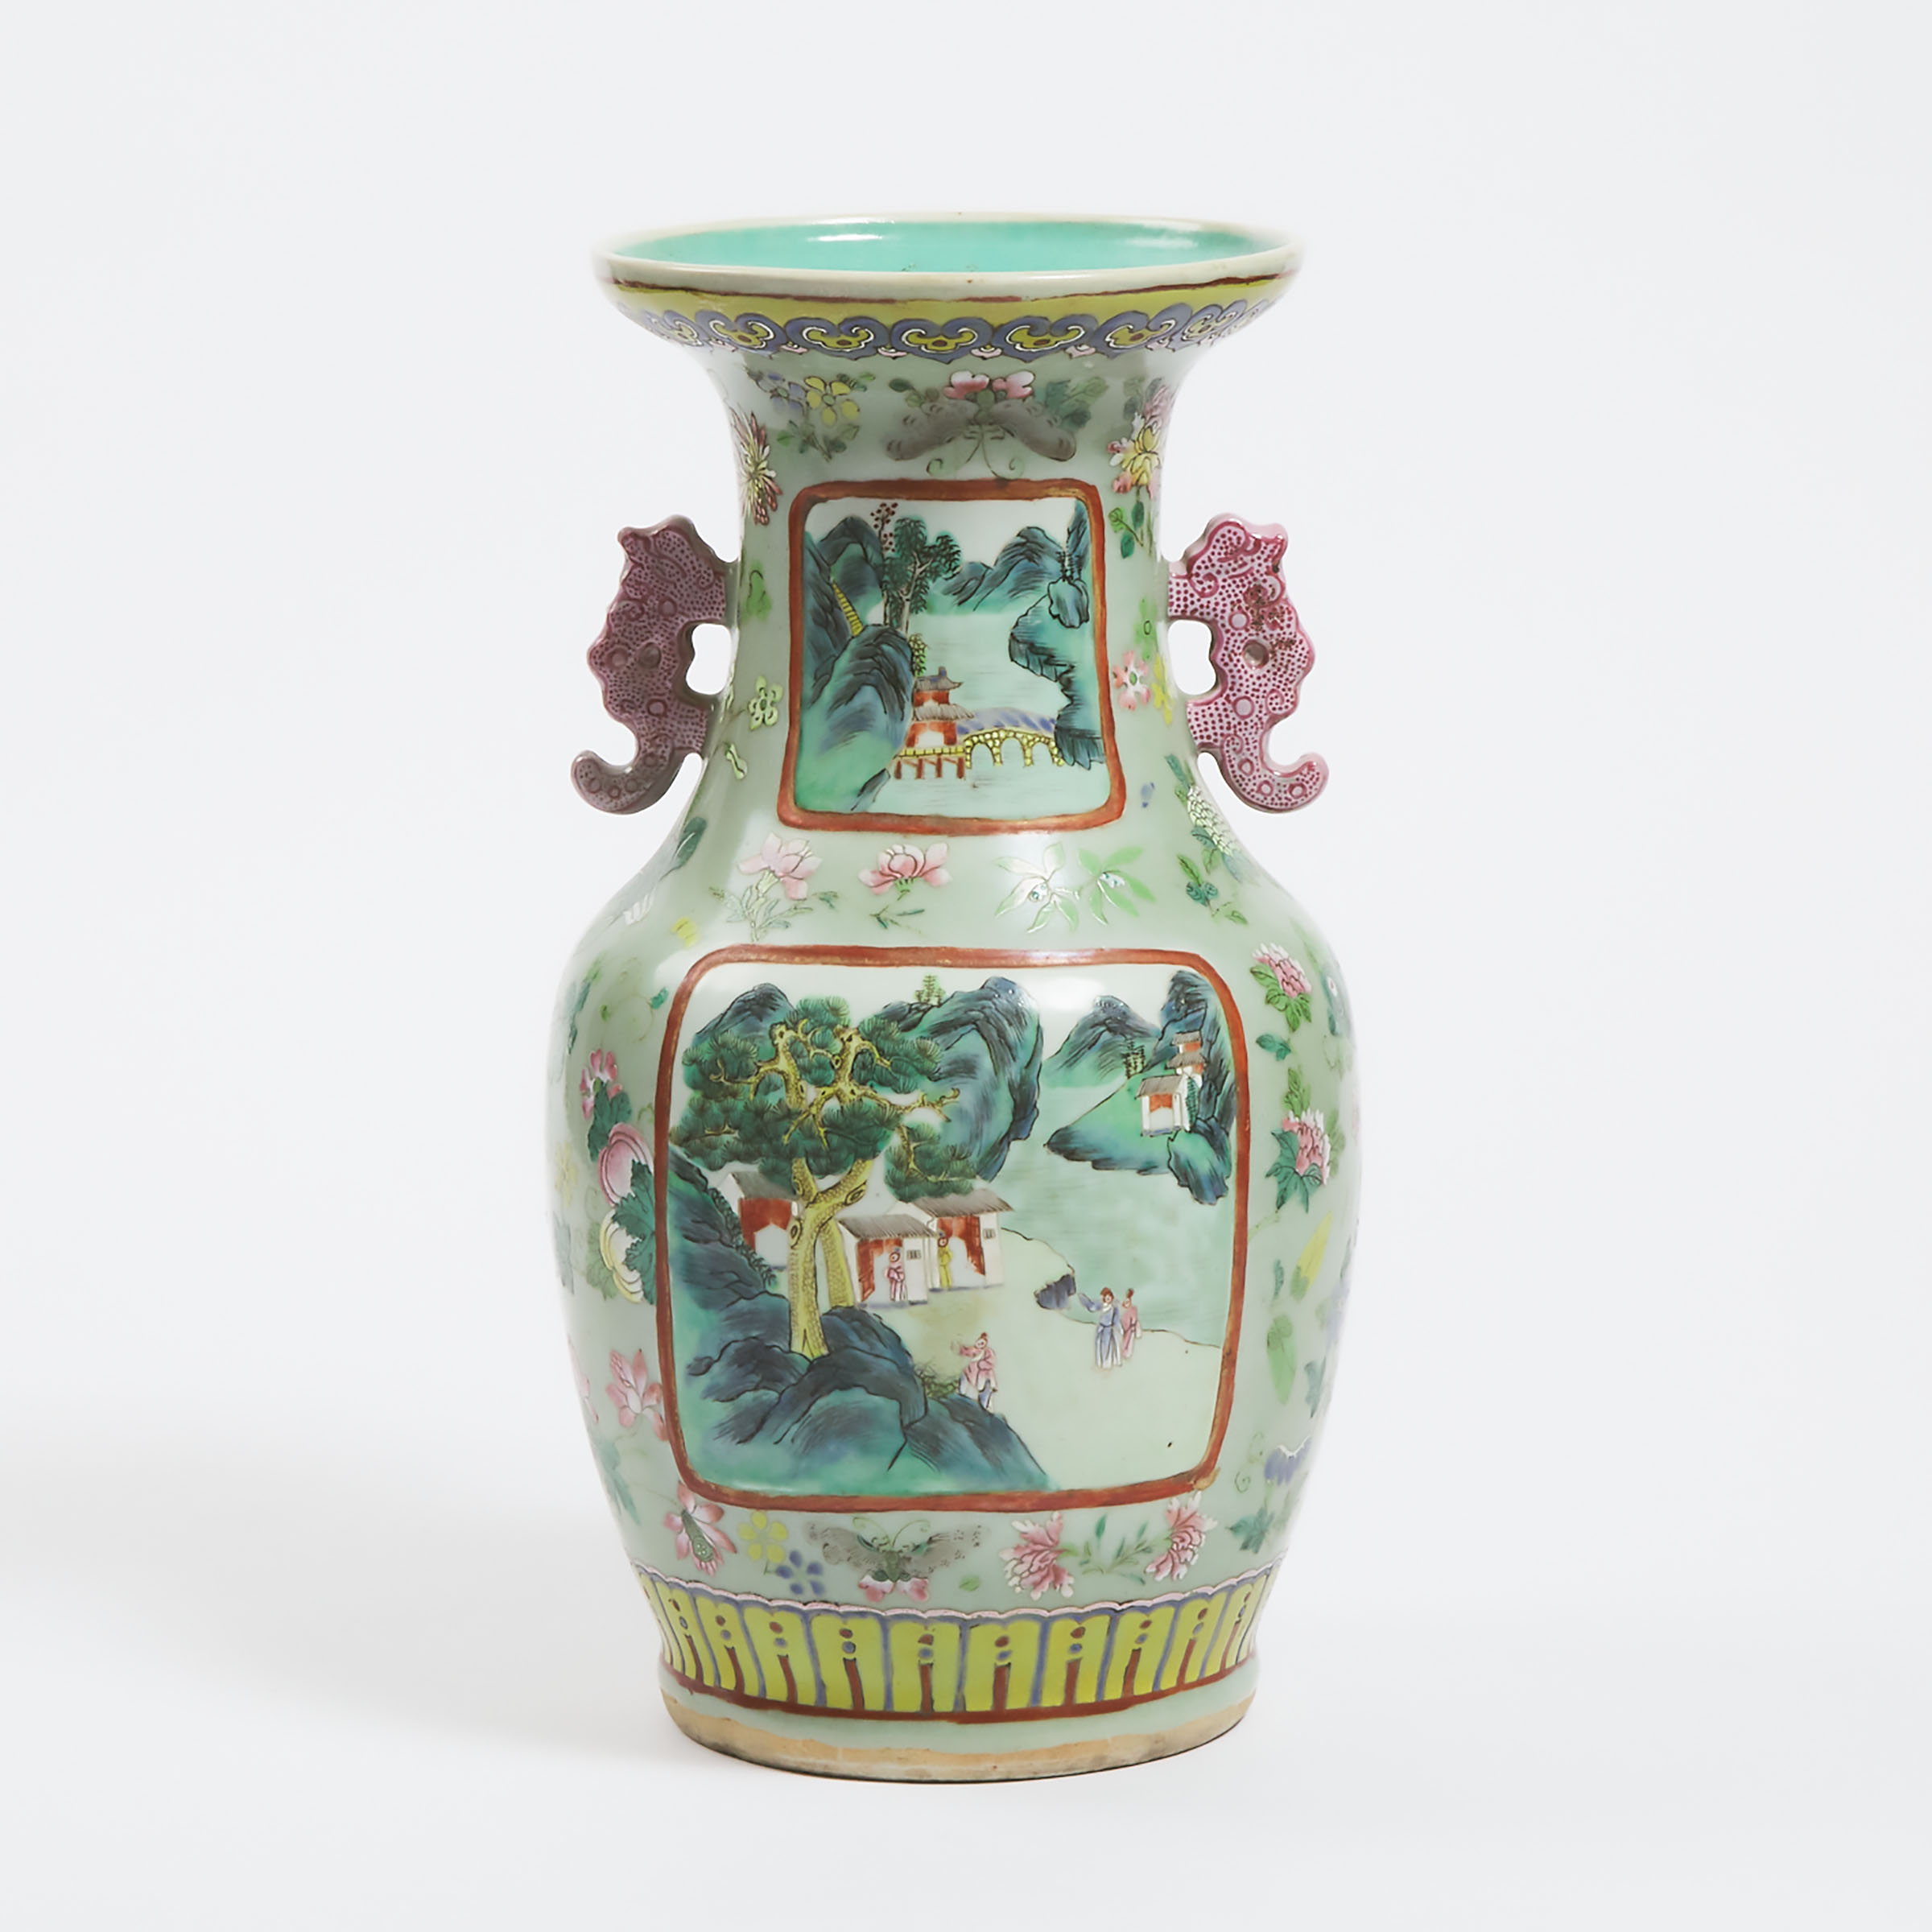 A Canton Enameled Celadon Vase, Late 19th/Early 20th Century